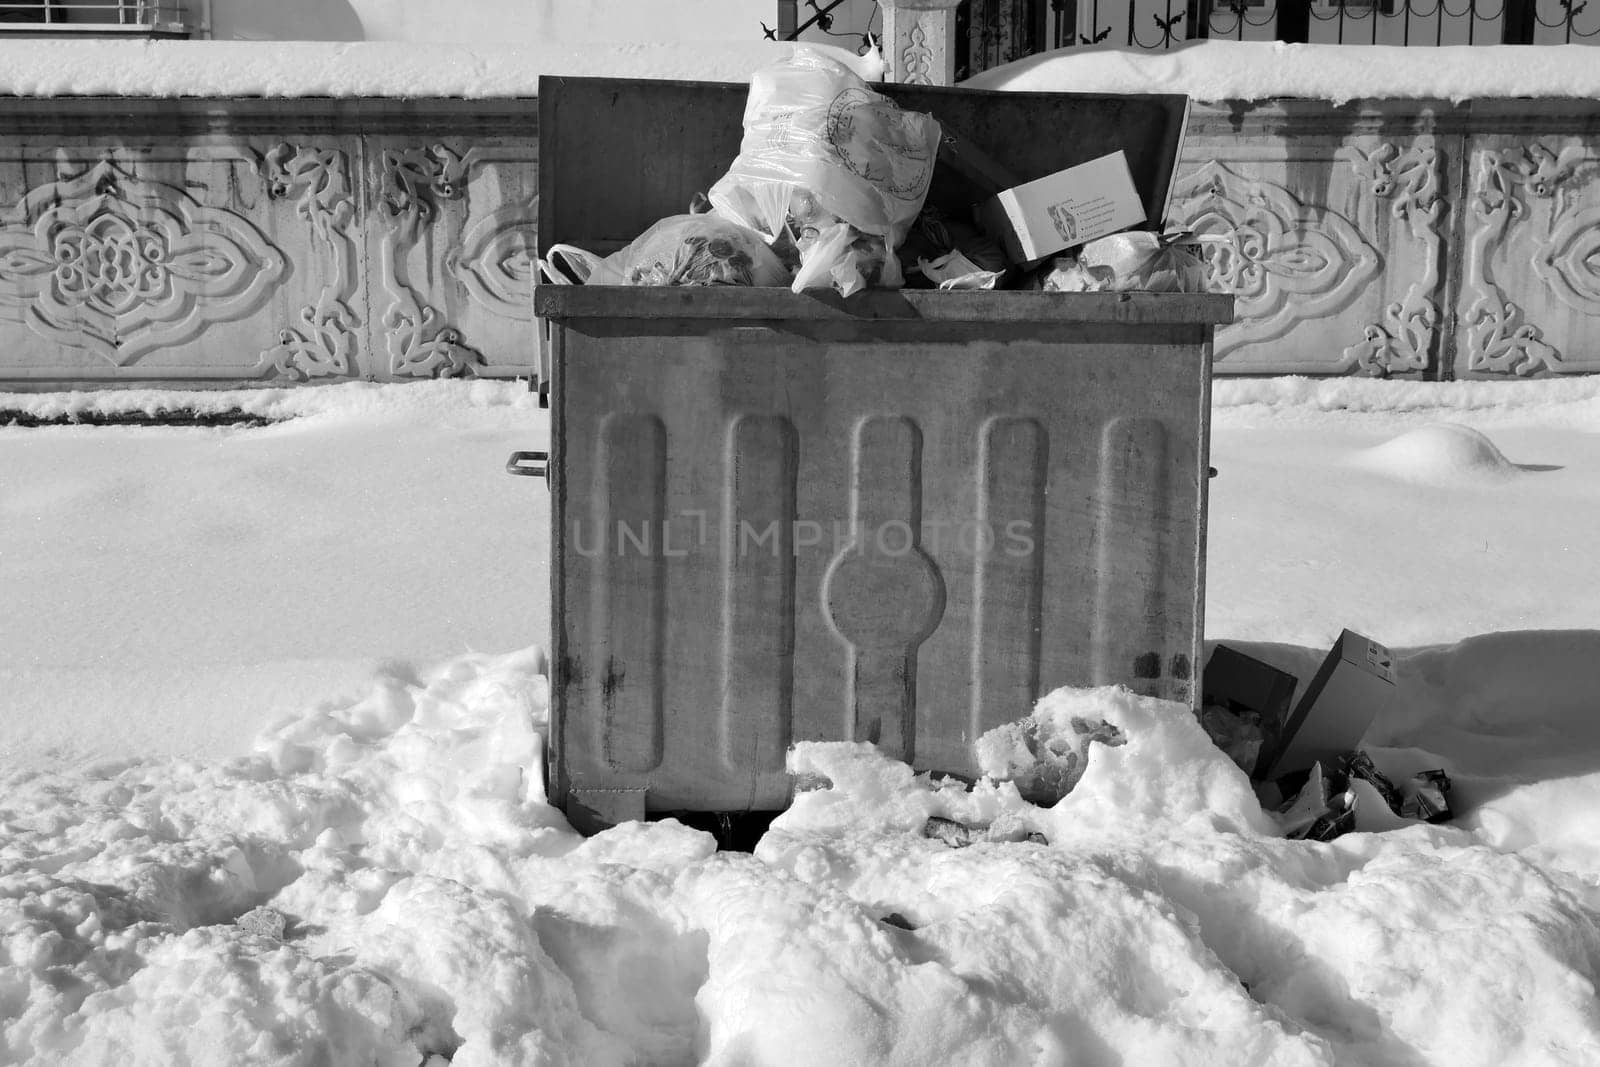 municipal cleaning works disrupted due to snowfall, wastes accumulating in garbage cans, by nhatipoglu